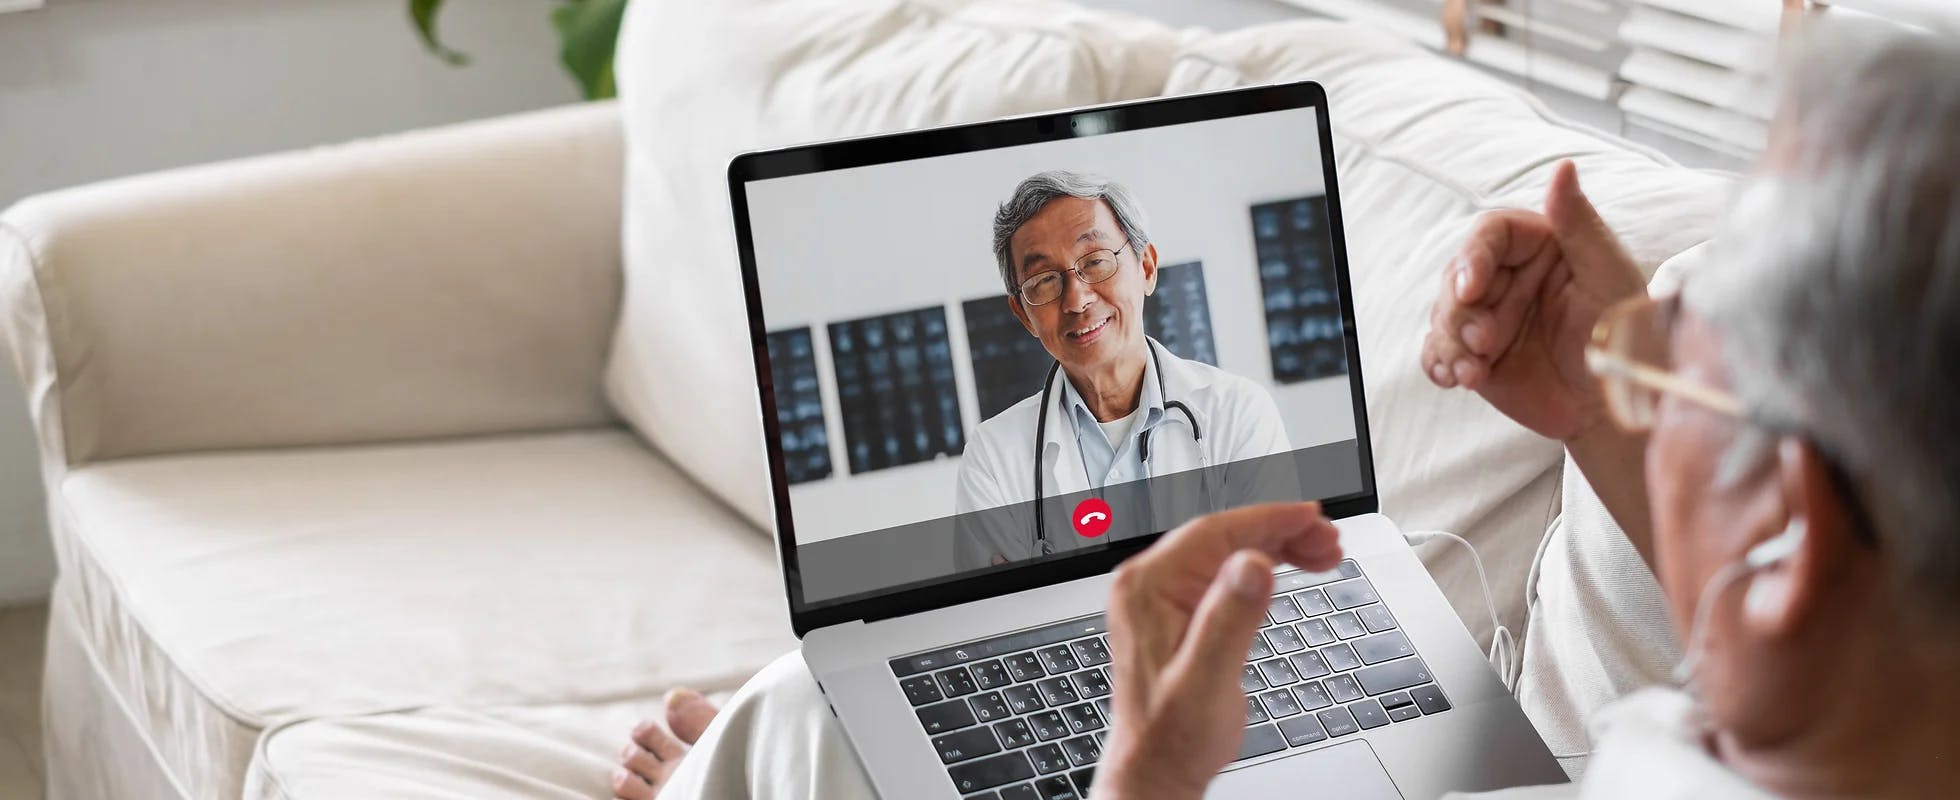 image of an elderly person speaking to their doctor via a video call on their computer